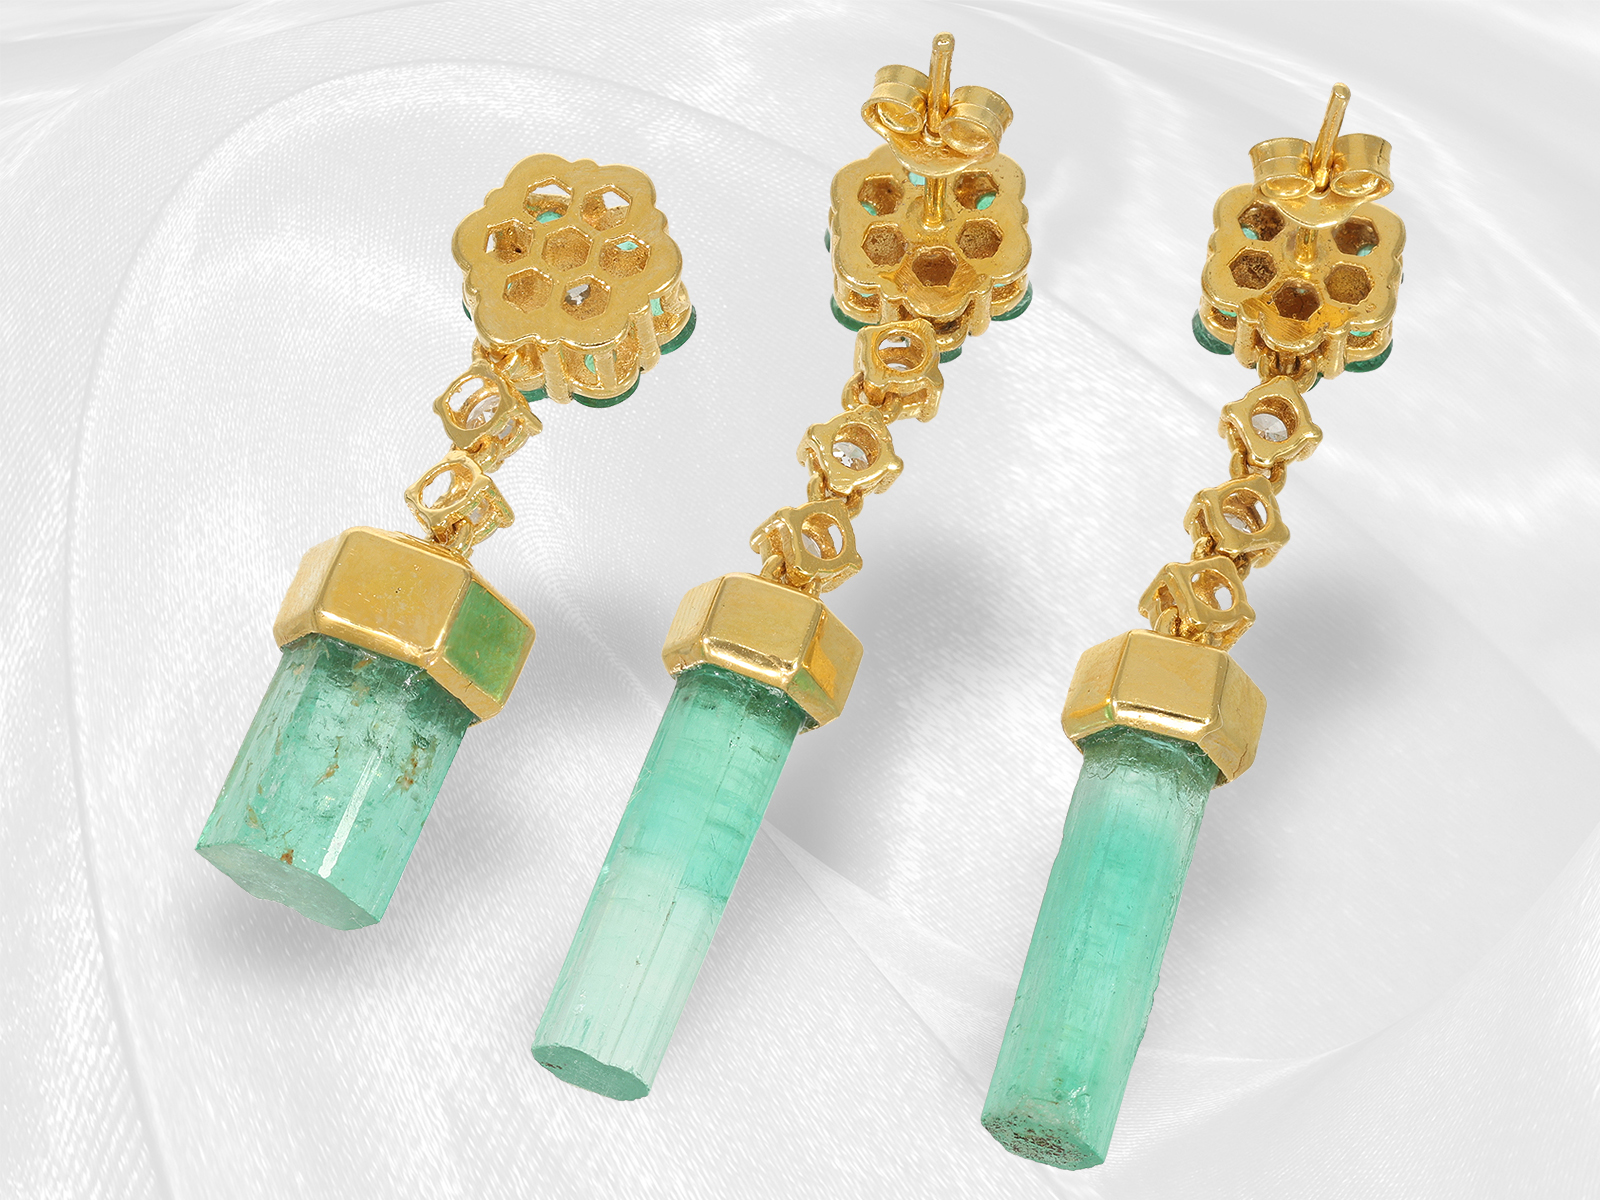 Golden earrings and matching pendant with emerald crystal and brilliant-cut diamonds, handmade, 18K  - Image 3 of 5